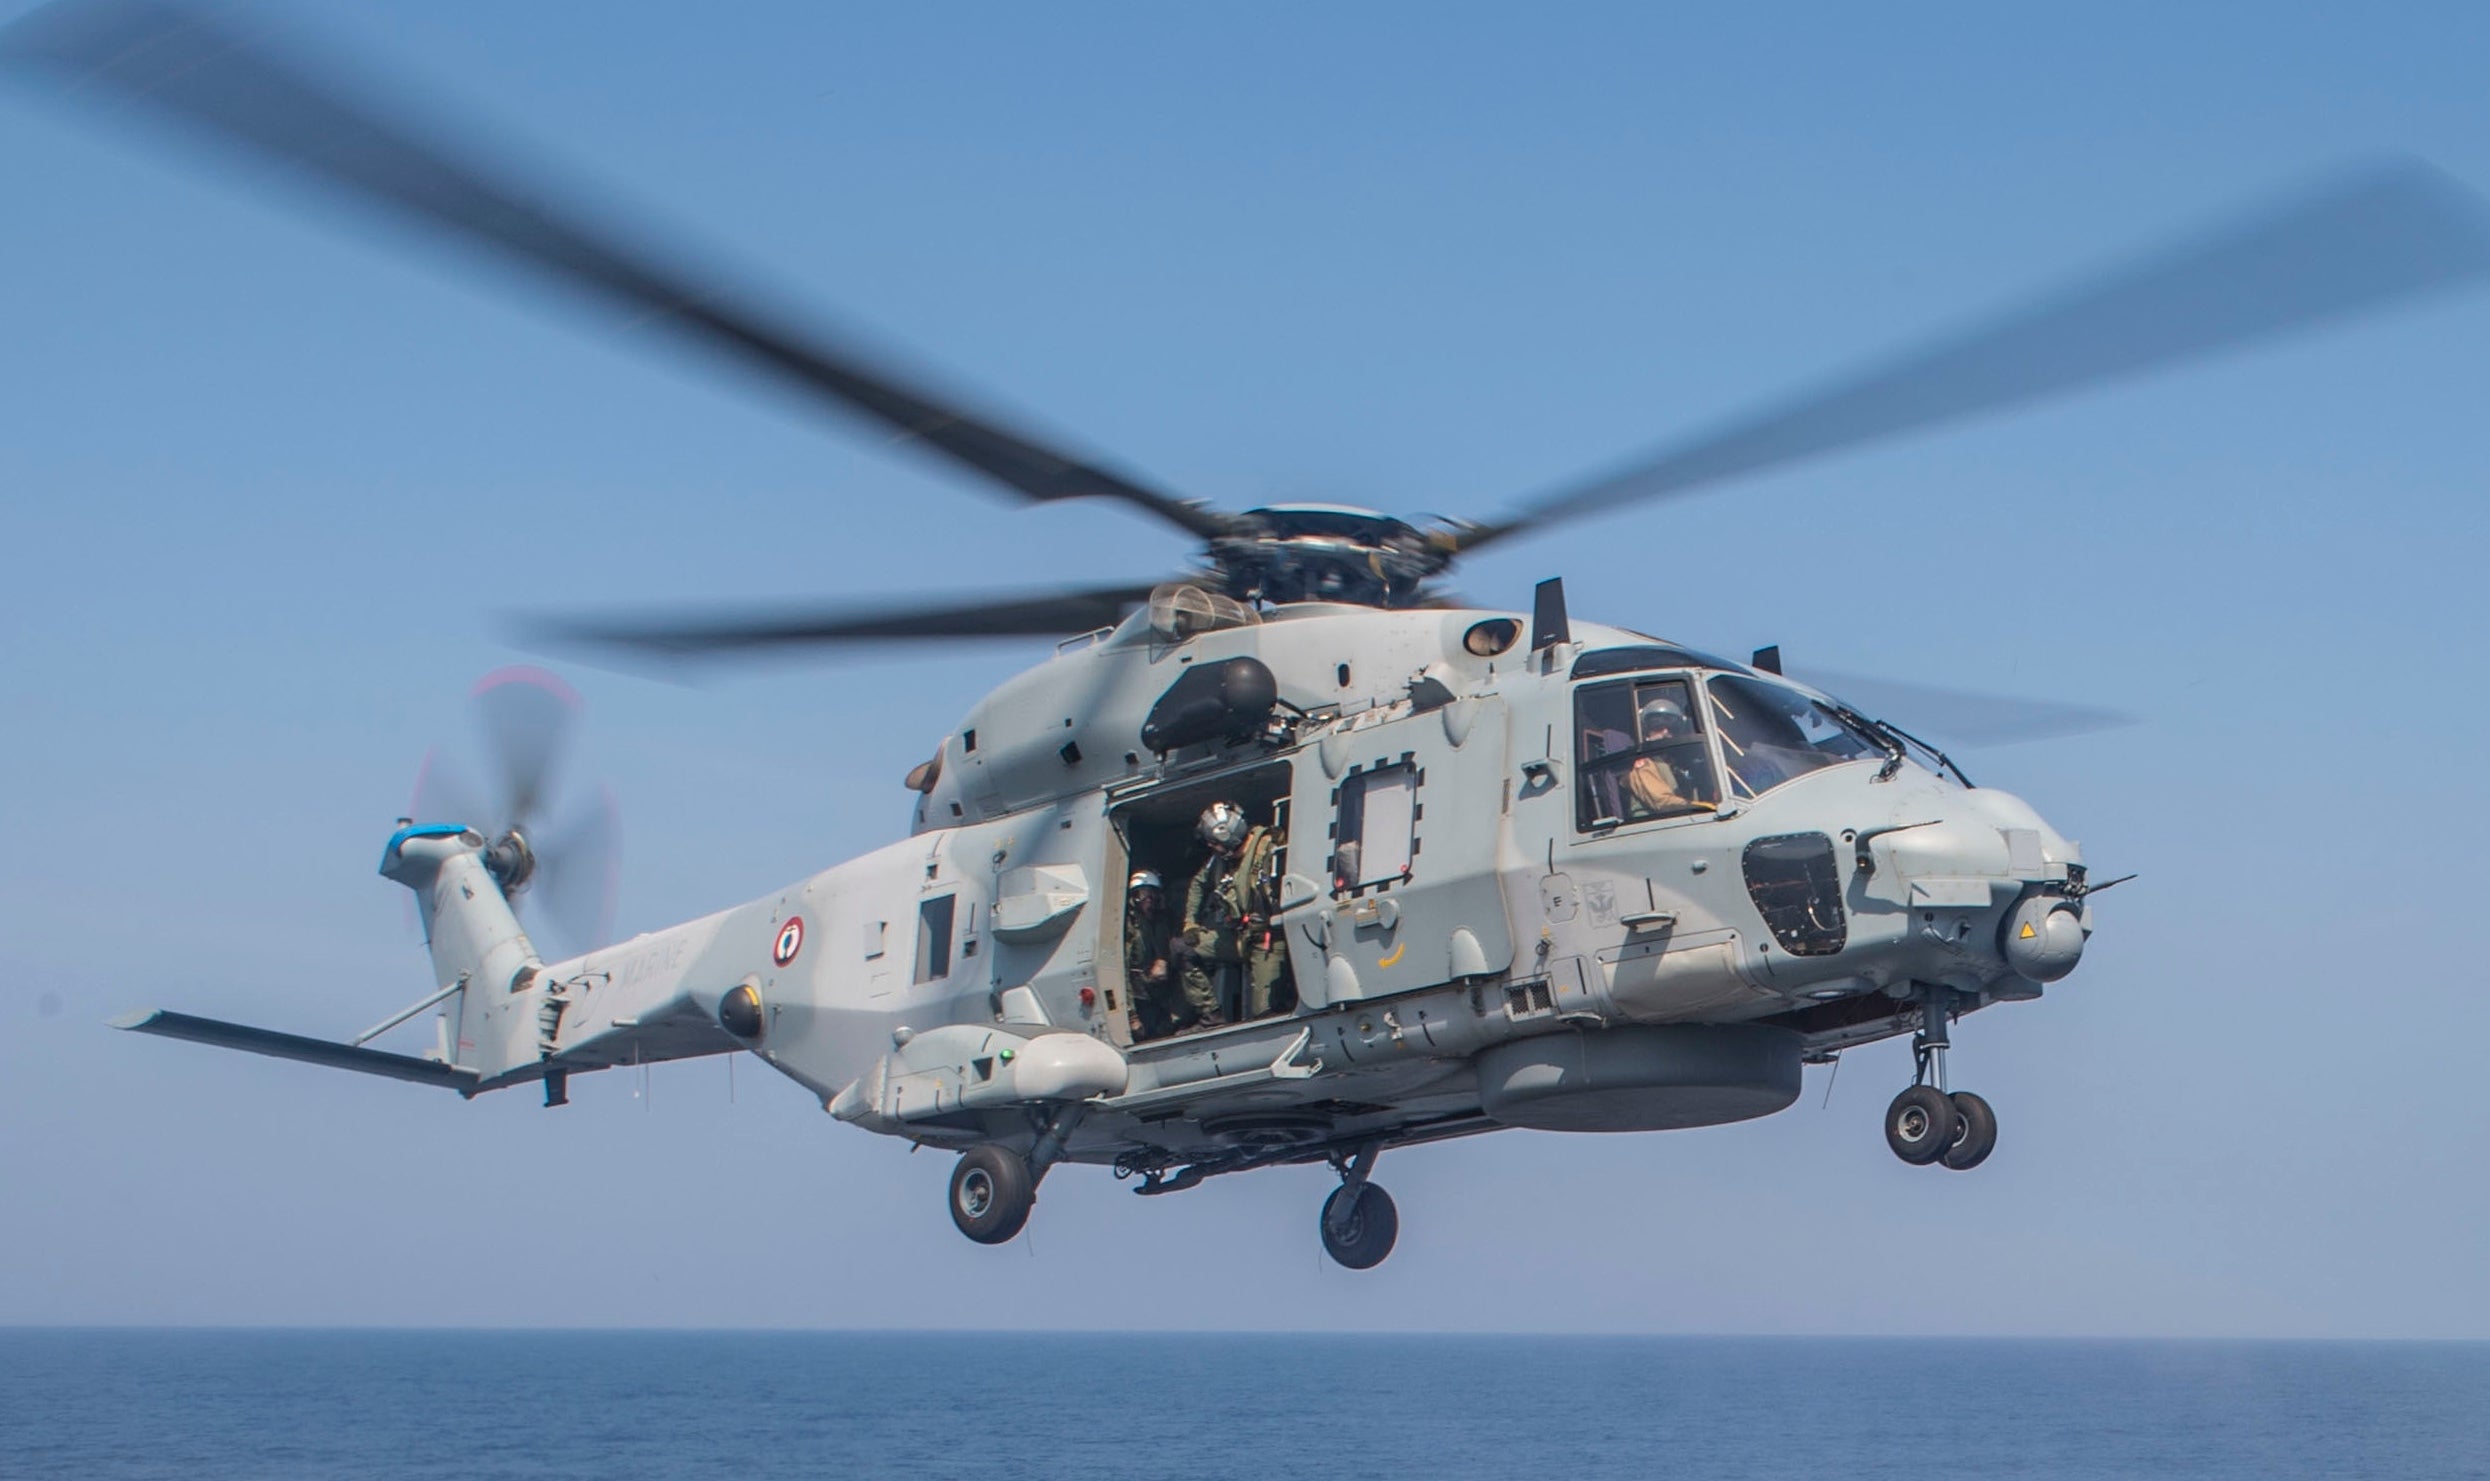 160210-N-ZZ786-091 BAY OF BENGAL (Feb. 10, 2016) A NH-90 helicopter assigned to the French Navy Aquitaine-class frigate Provence (D652) lands on the flight deck of the Ticonderoga-class guided-missile cruiser USS Antietam (CG 54) during a bilateral exercise. Antietam, forward deployed to Yokosuka, Japan, is on patrol in the 7th Fleet area of operations in support of security and stability in the Indo-Asia-Pacific. (U.S. Navy photo by Mass Communication Specialist 3rd Class David Flewellyn/Released)